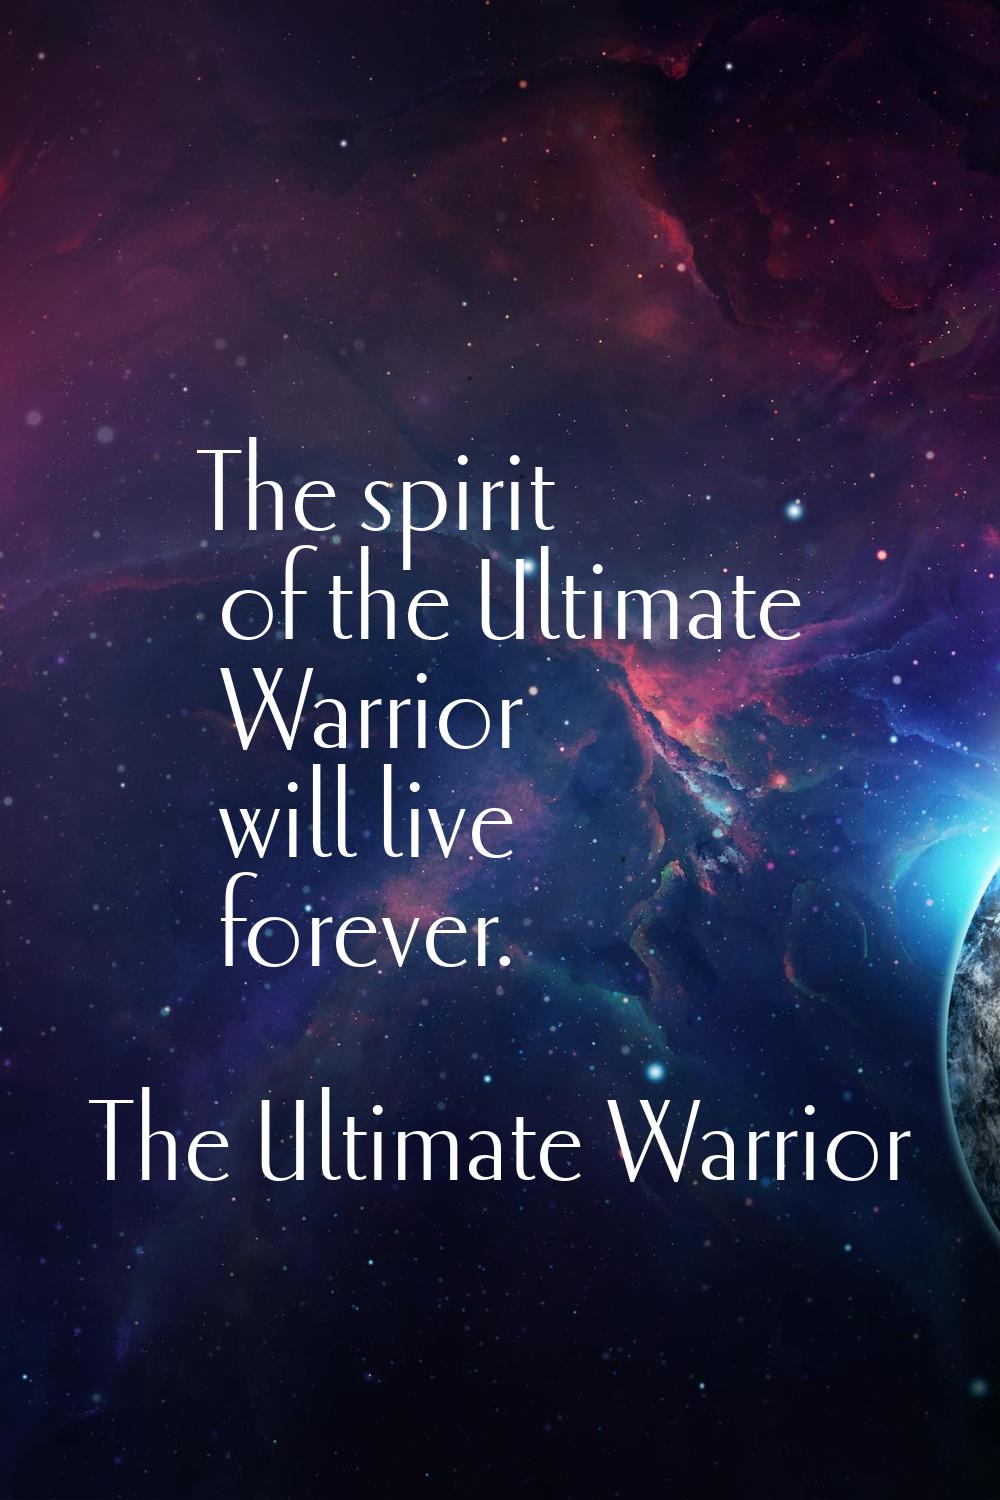 The spirit of the Ultimate Warrior will live forever.